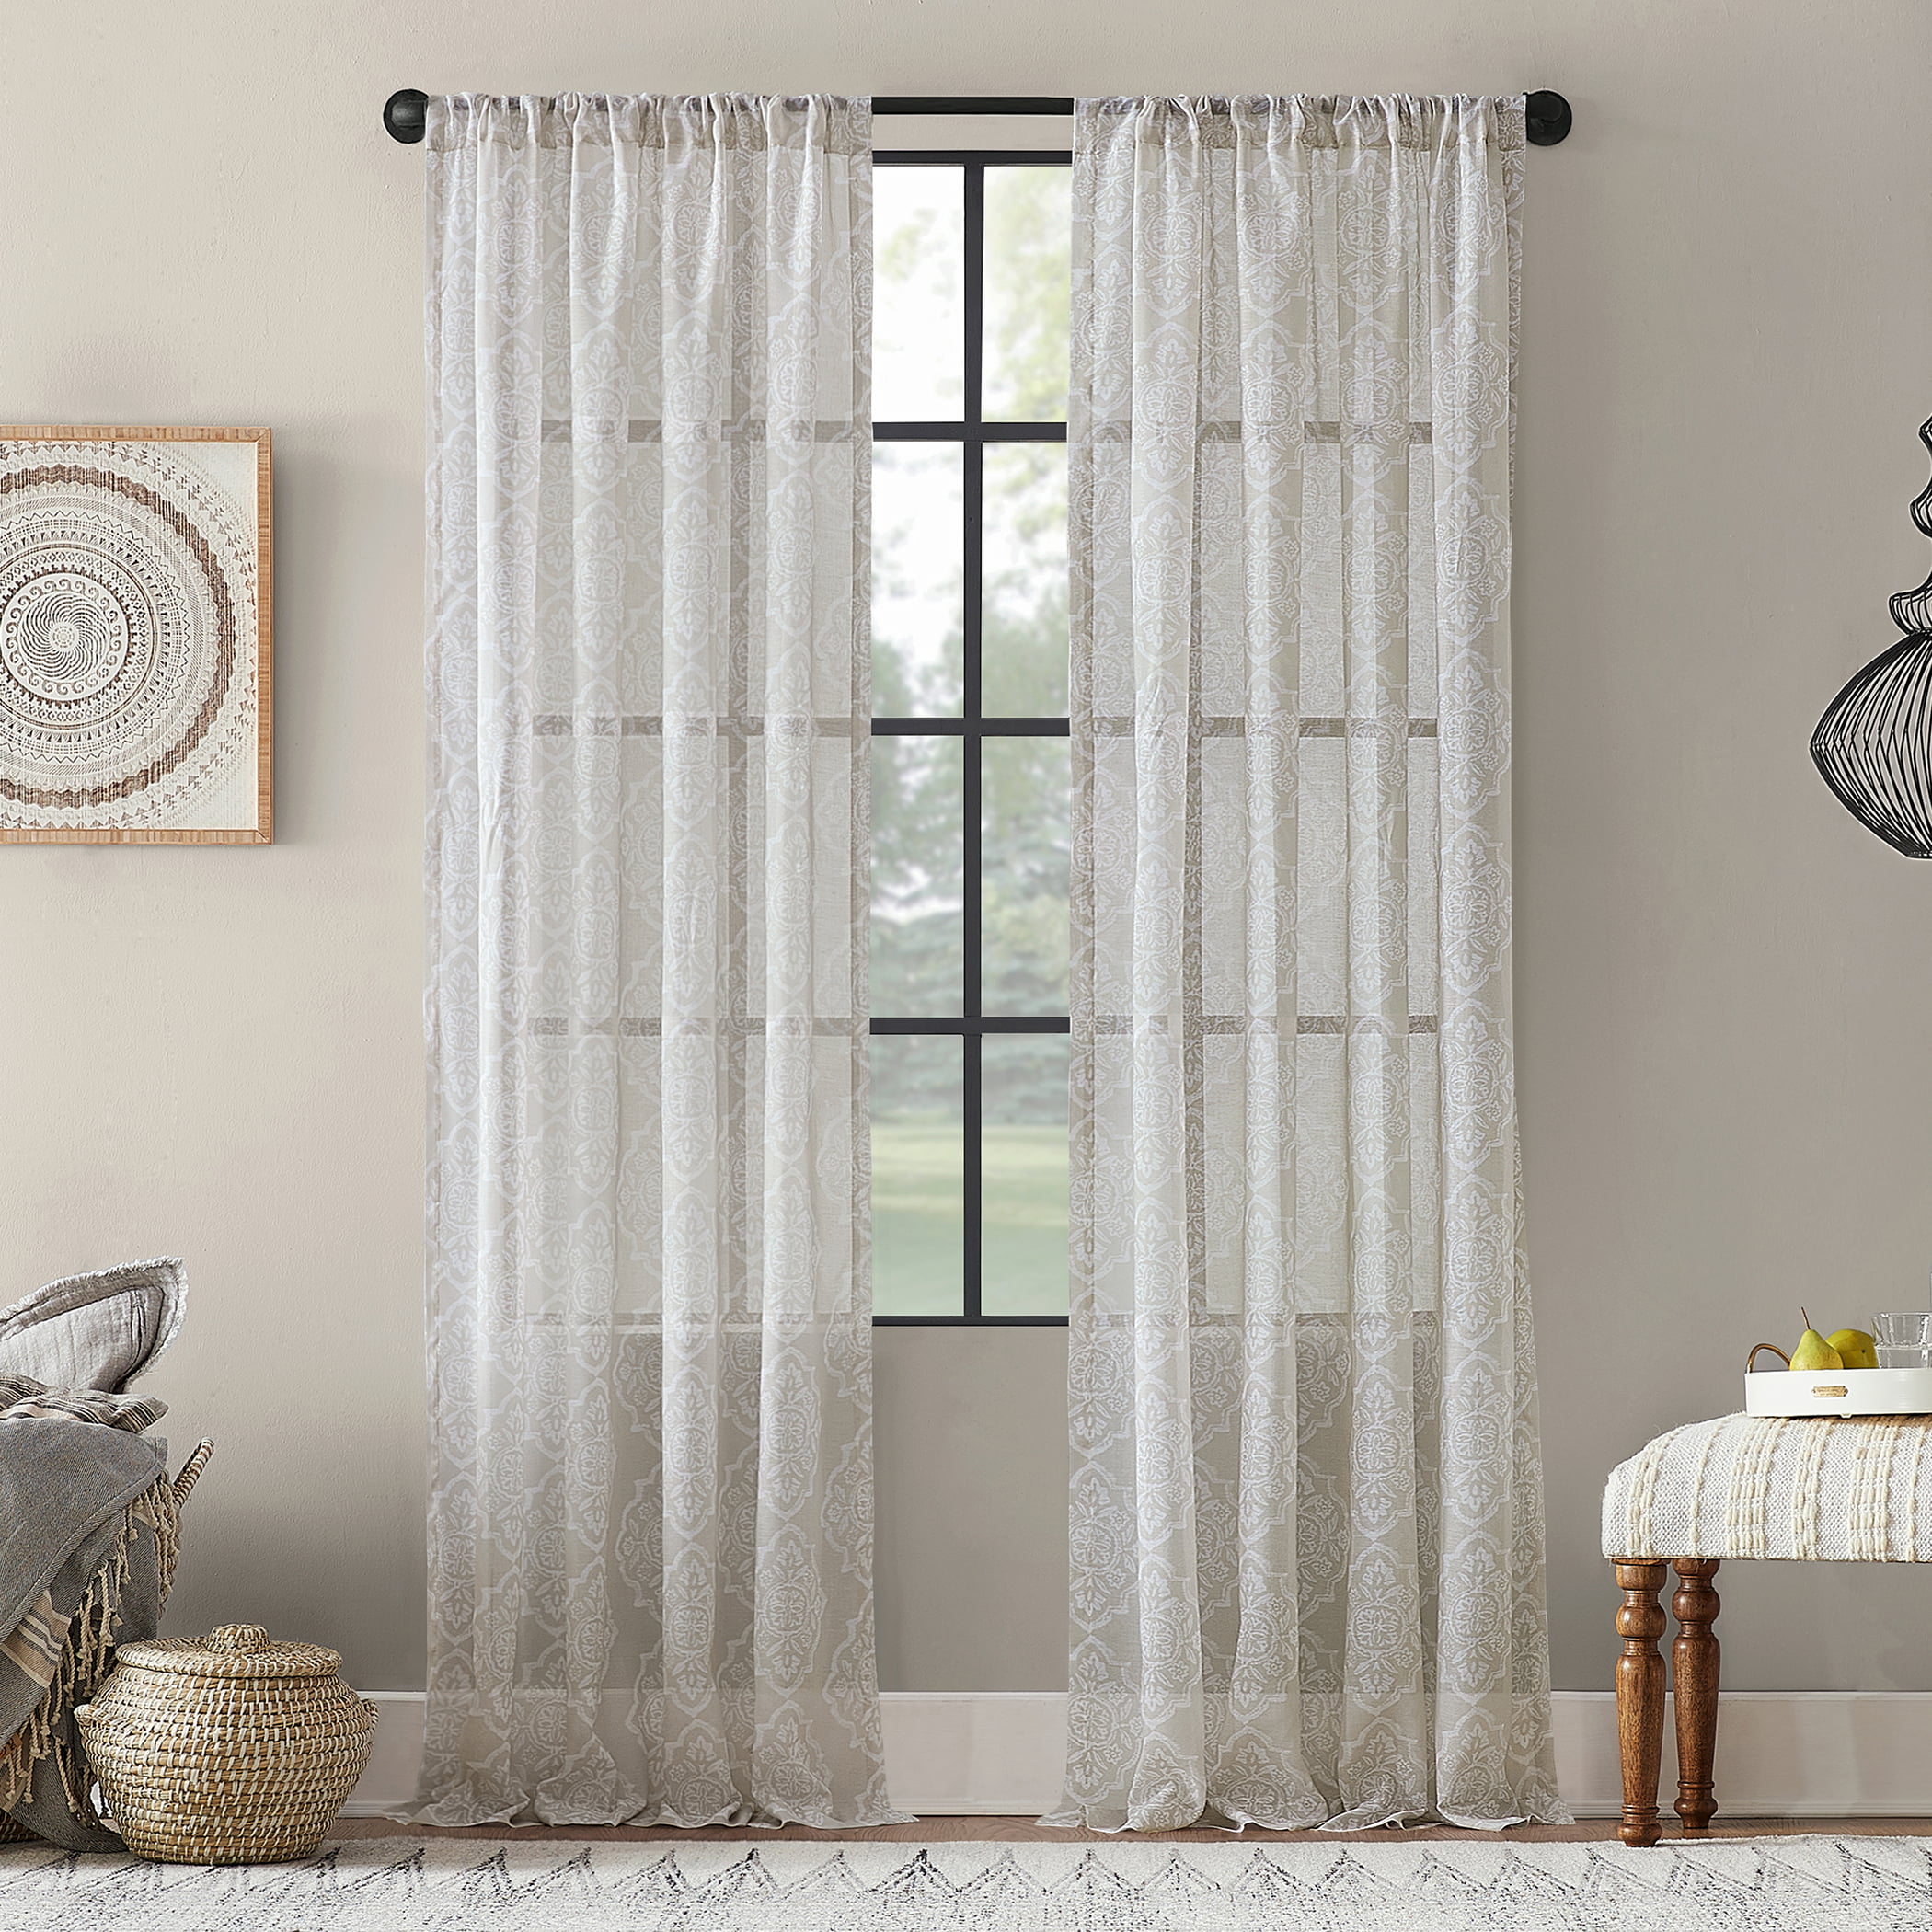 Global Drapes: Curtain Styles From Around The World